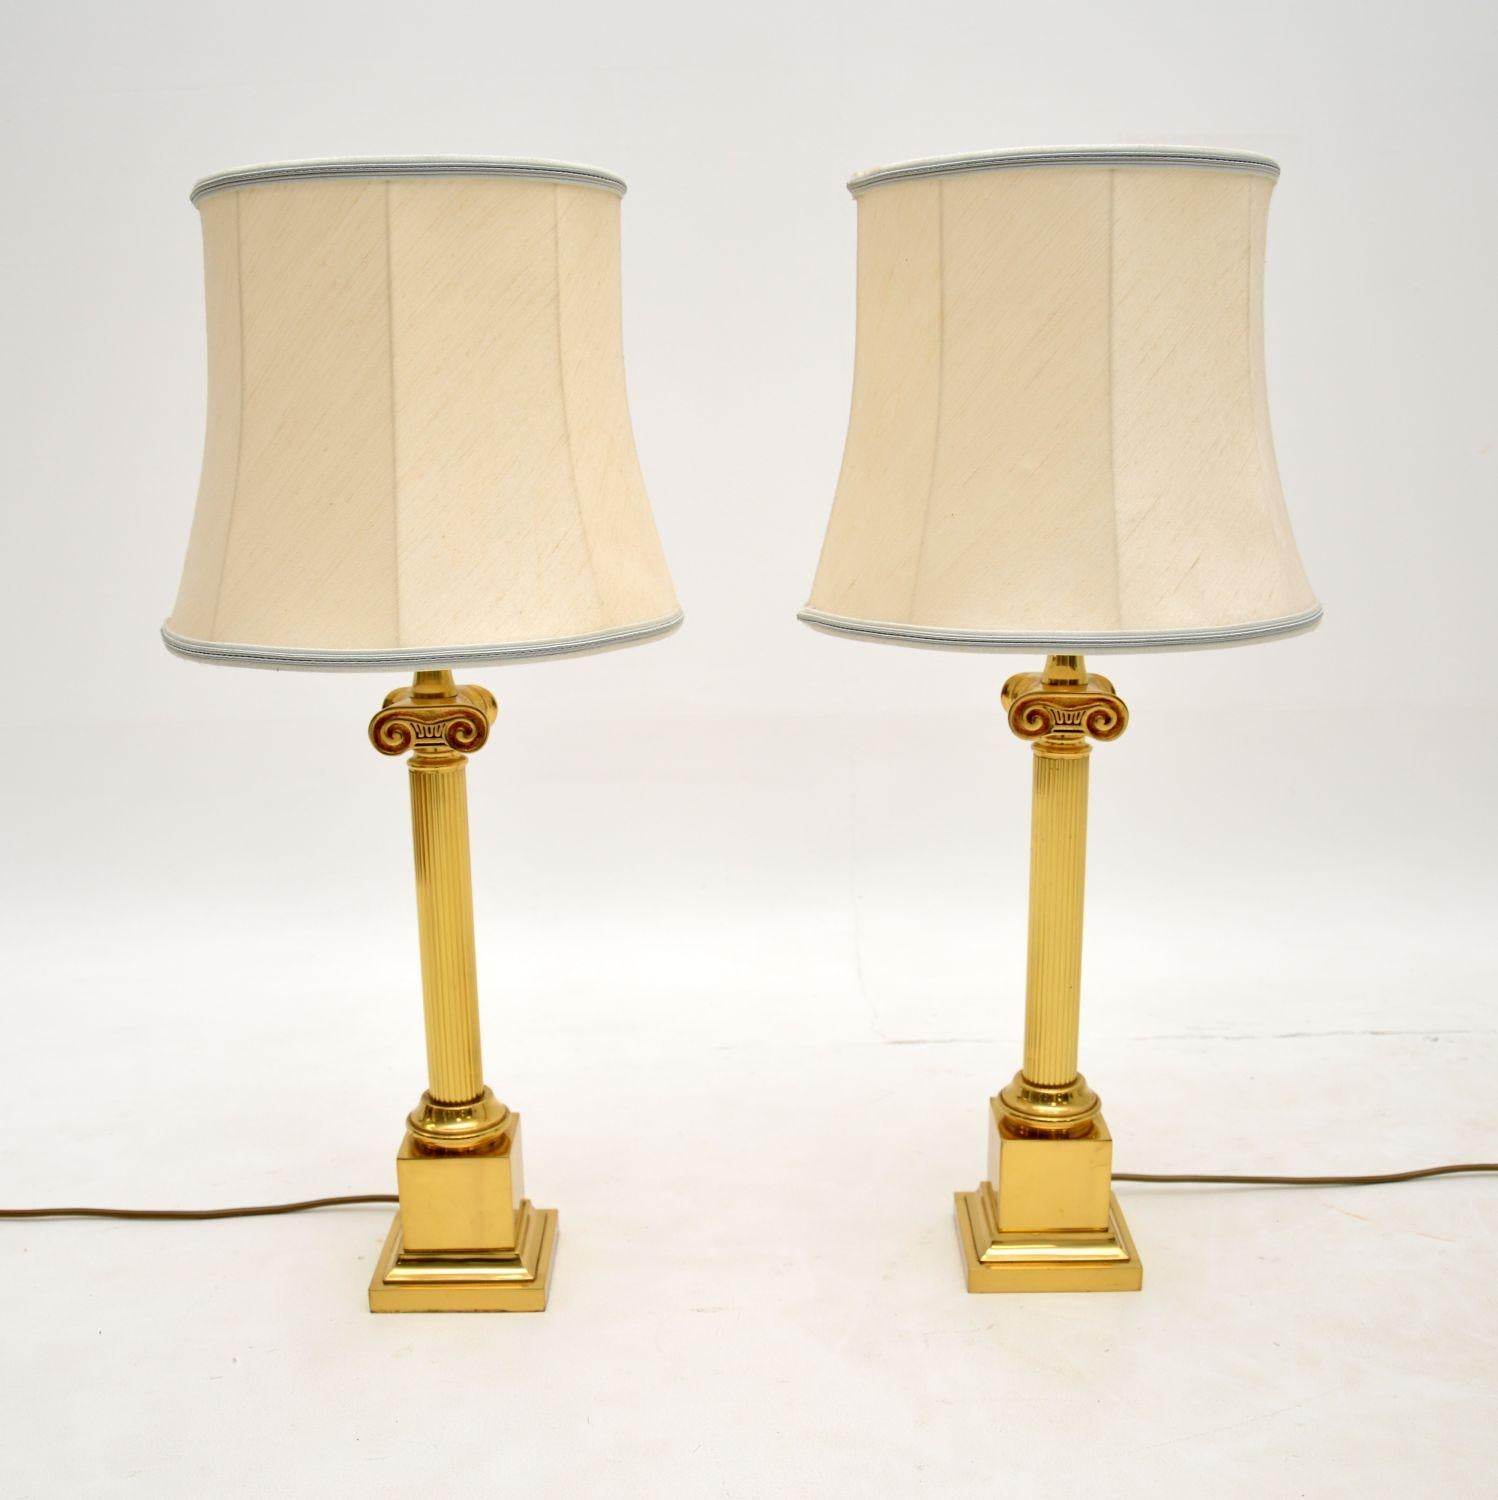 A stylish and impressive pair of vintage table lamps in the antique neoclassical style. These were made in England, they date from the 1960-70’s.

They are of superb quality and are very large for table lamps. They are designed as Corinthian